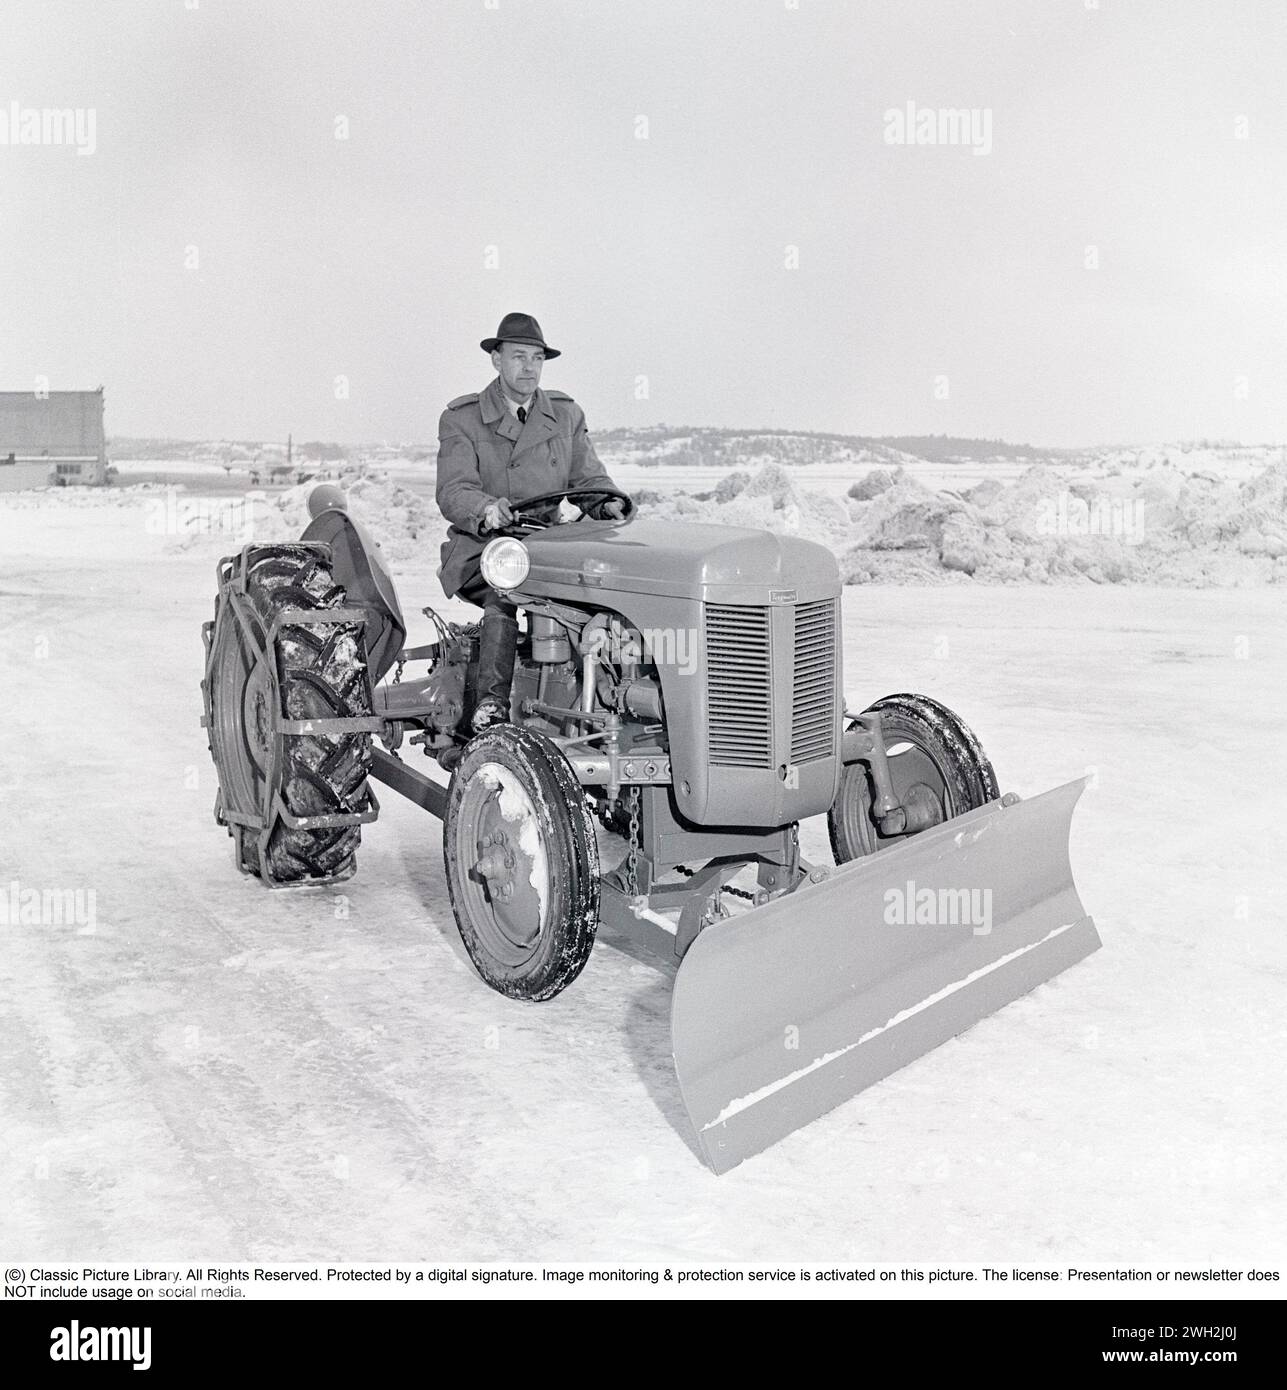 Ferguson tractor in the 1950s. A driver on the iconic Ferguson tractor featured with caterpillar bands and a snow plow in front. The Ferguson tractors were the first modern agricultural tractors and its three poinkt linkage system was a major development.   1951. Kristoffersson ref BB46-3 Stock Photo